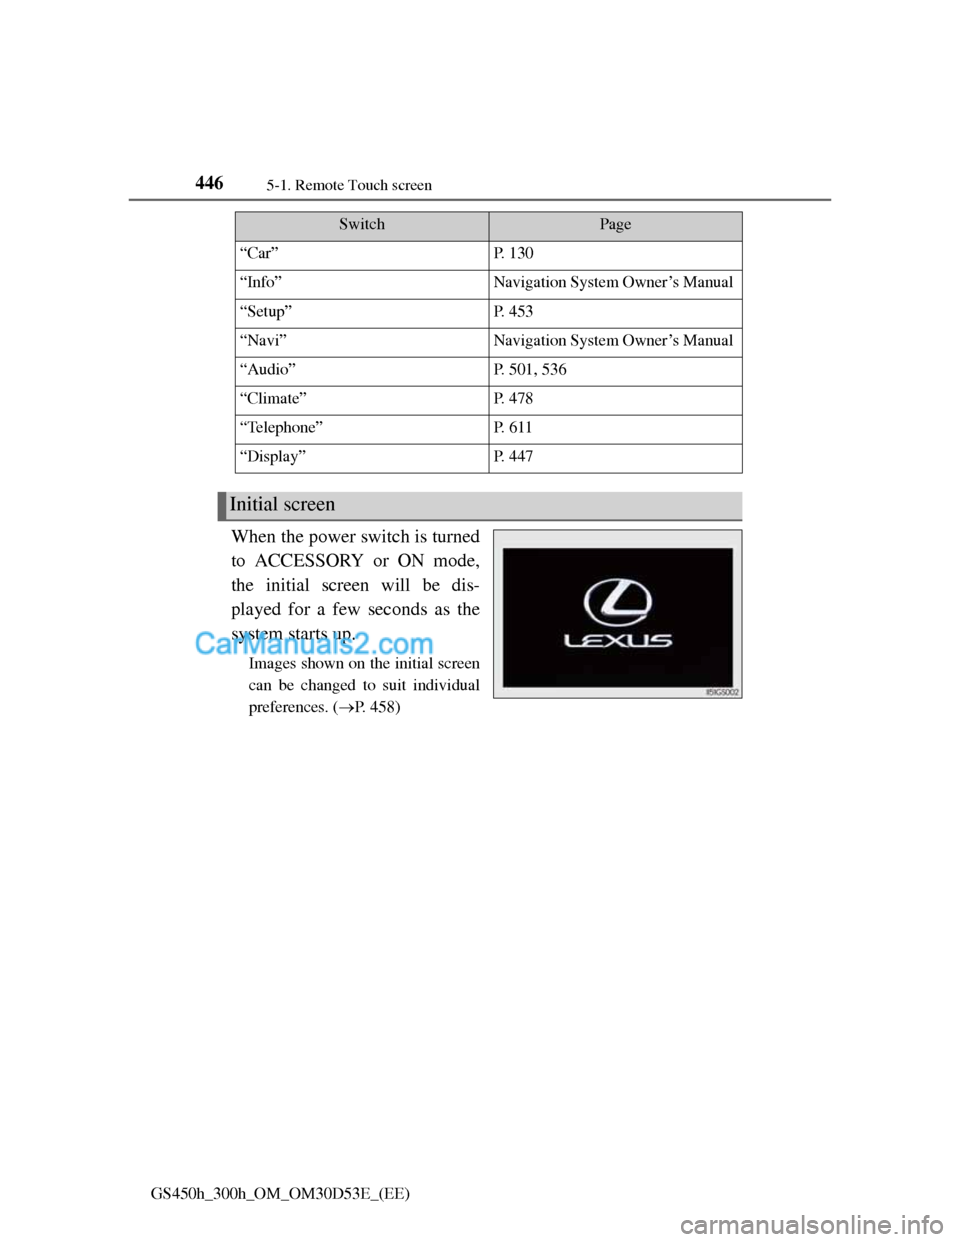 Lexus GS300h 2013  Owners Manual 4465-1. Remote Touch screen
GS450h_300h_OM_OM30D53E_(EE)
When the power switch is turned
to ACCESSORY or ON mode,
the initial screen will be dis-
played for a few seconds as the
system starts up.
Imag